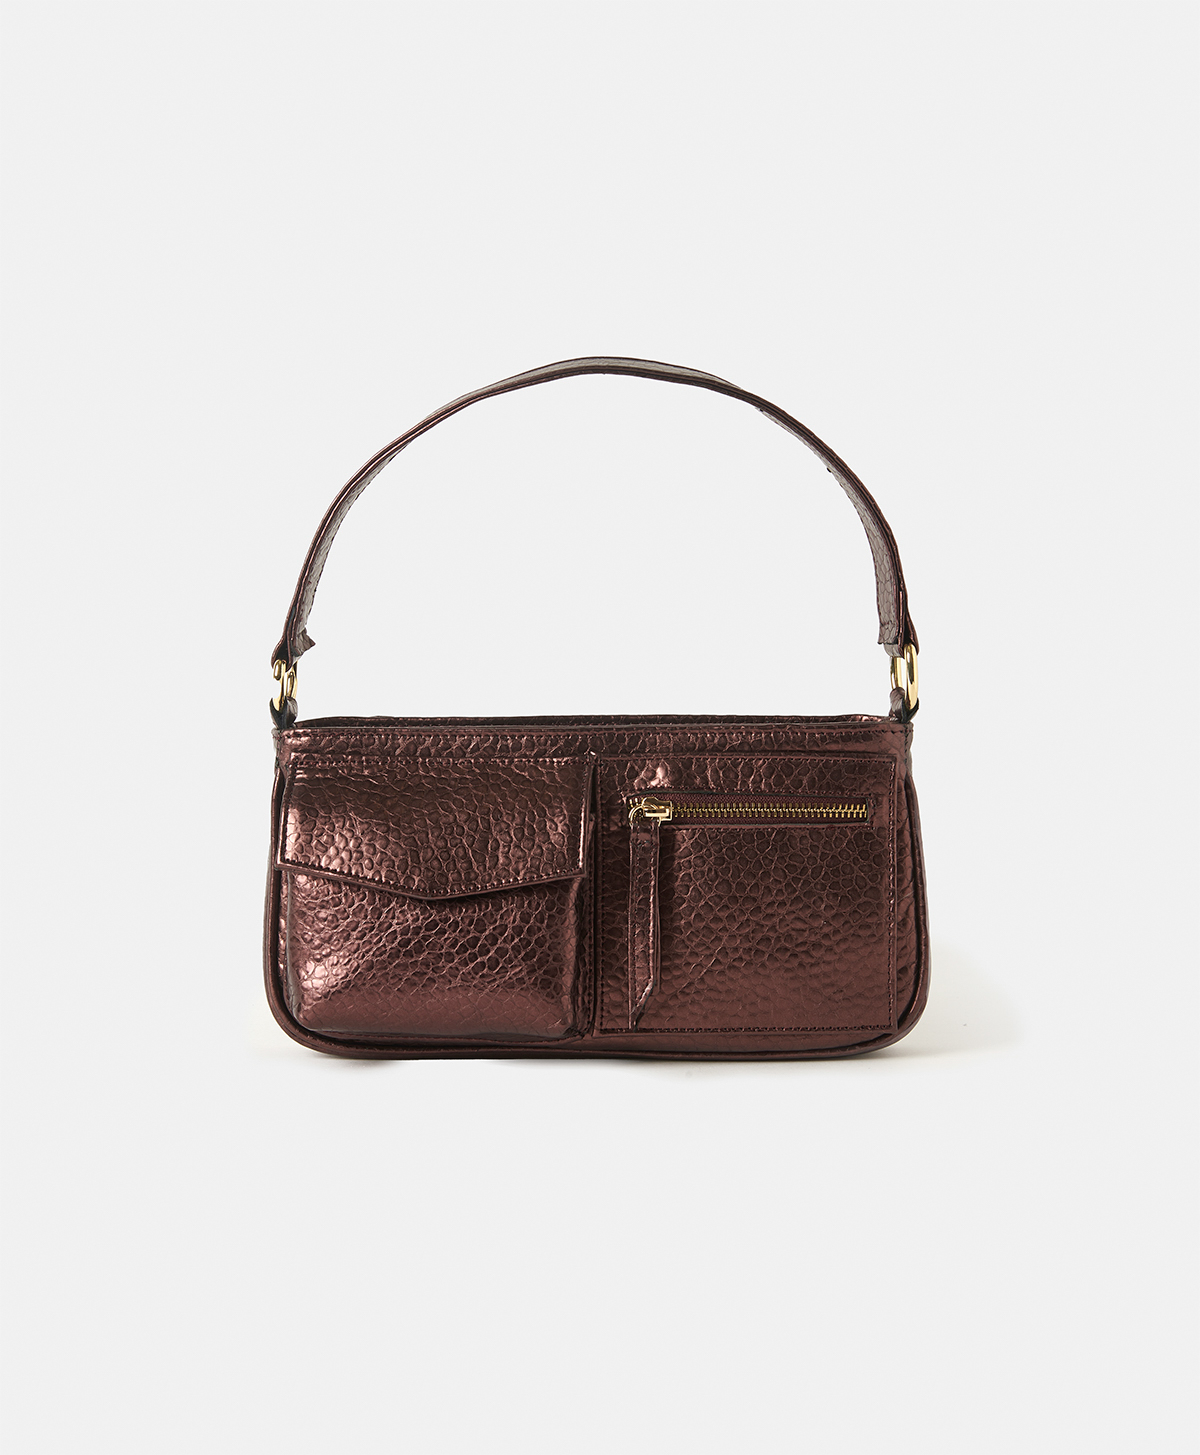 GINEPRO BAG IN LAMÉ LEATHER - BURGUNDY - Momonì